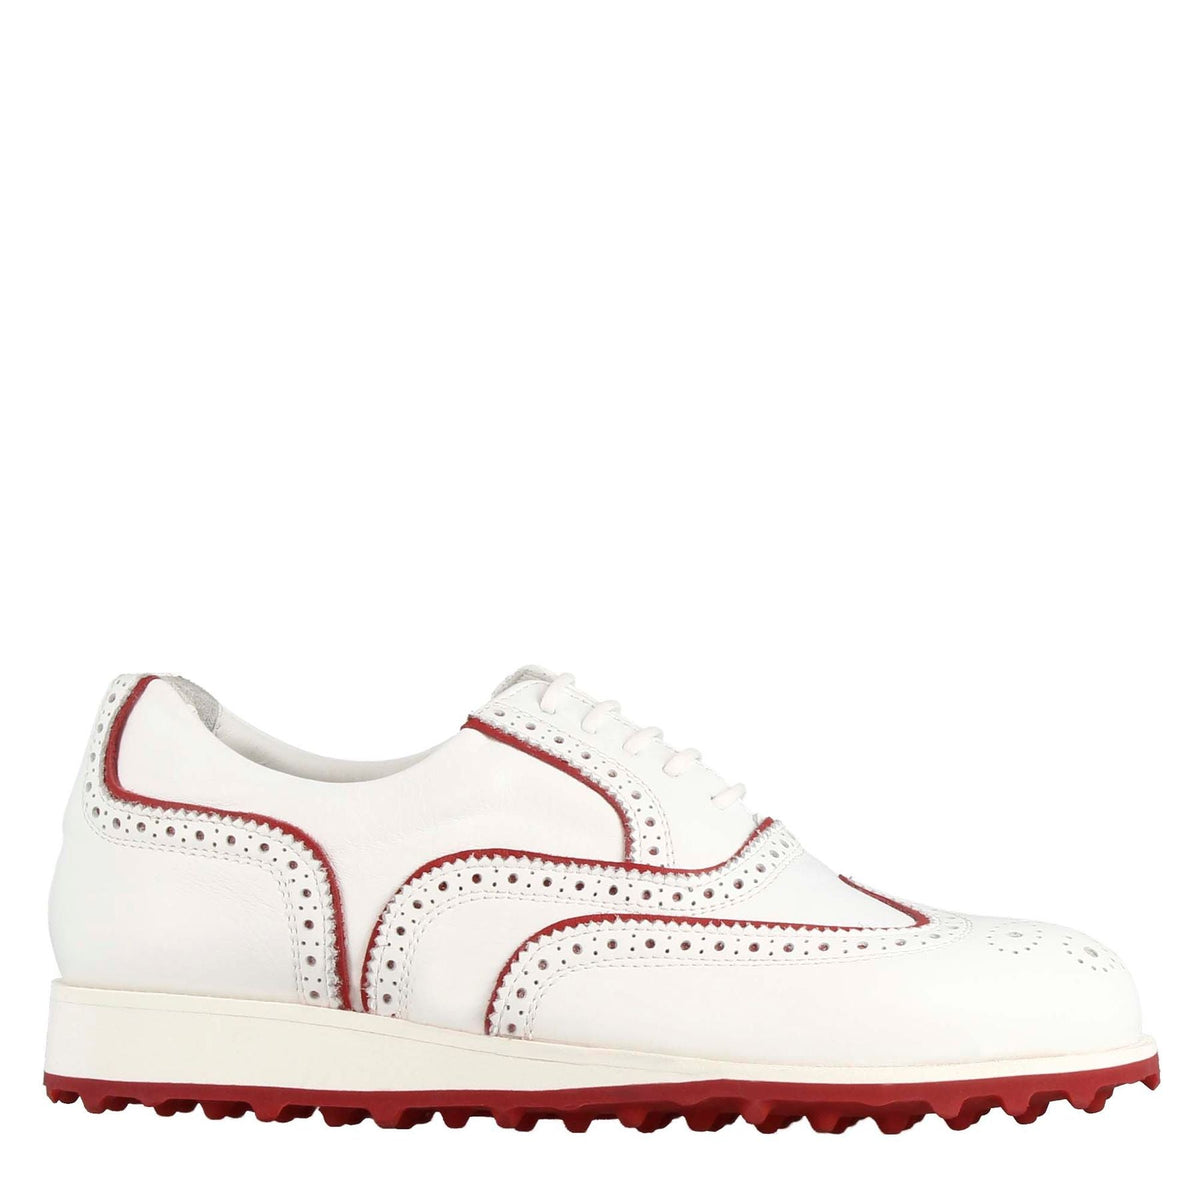 Handmade women's golf shoes in white leather with red details